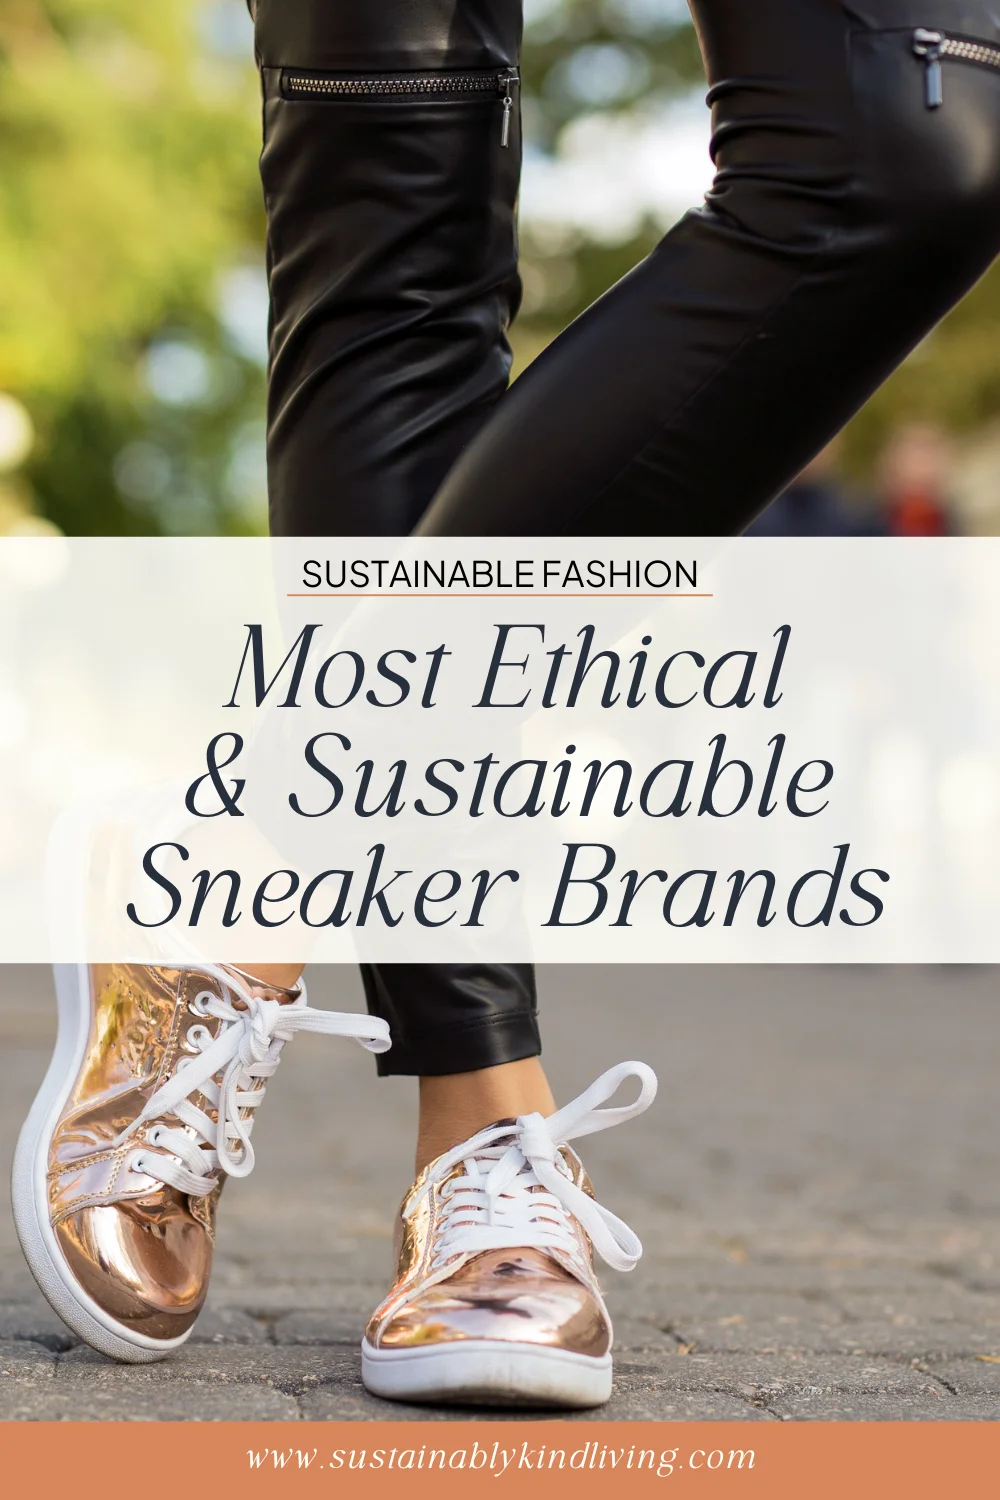 sneaker brands from recycled materials